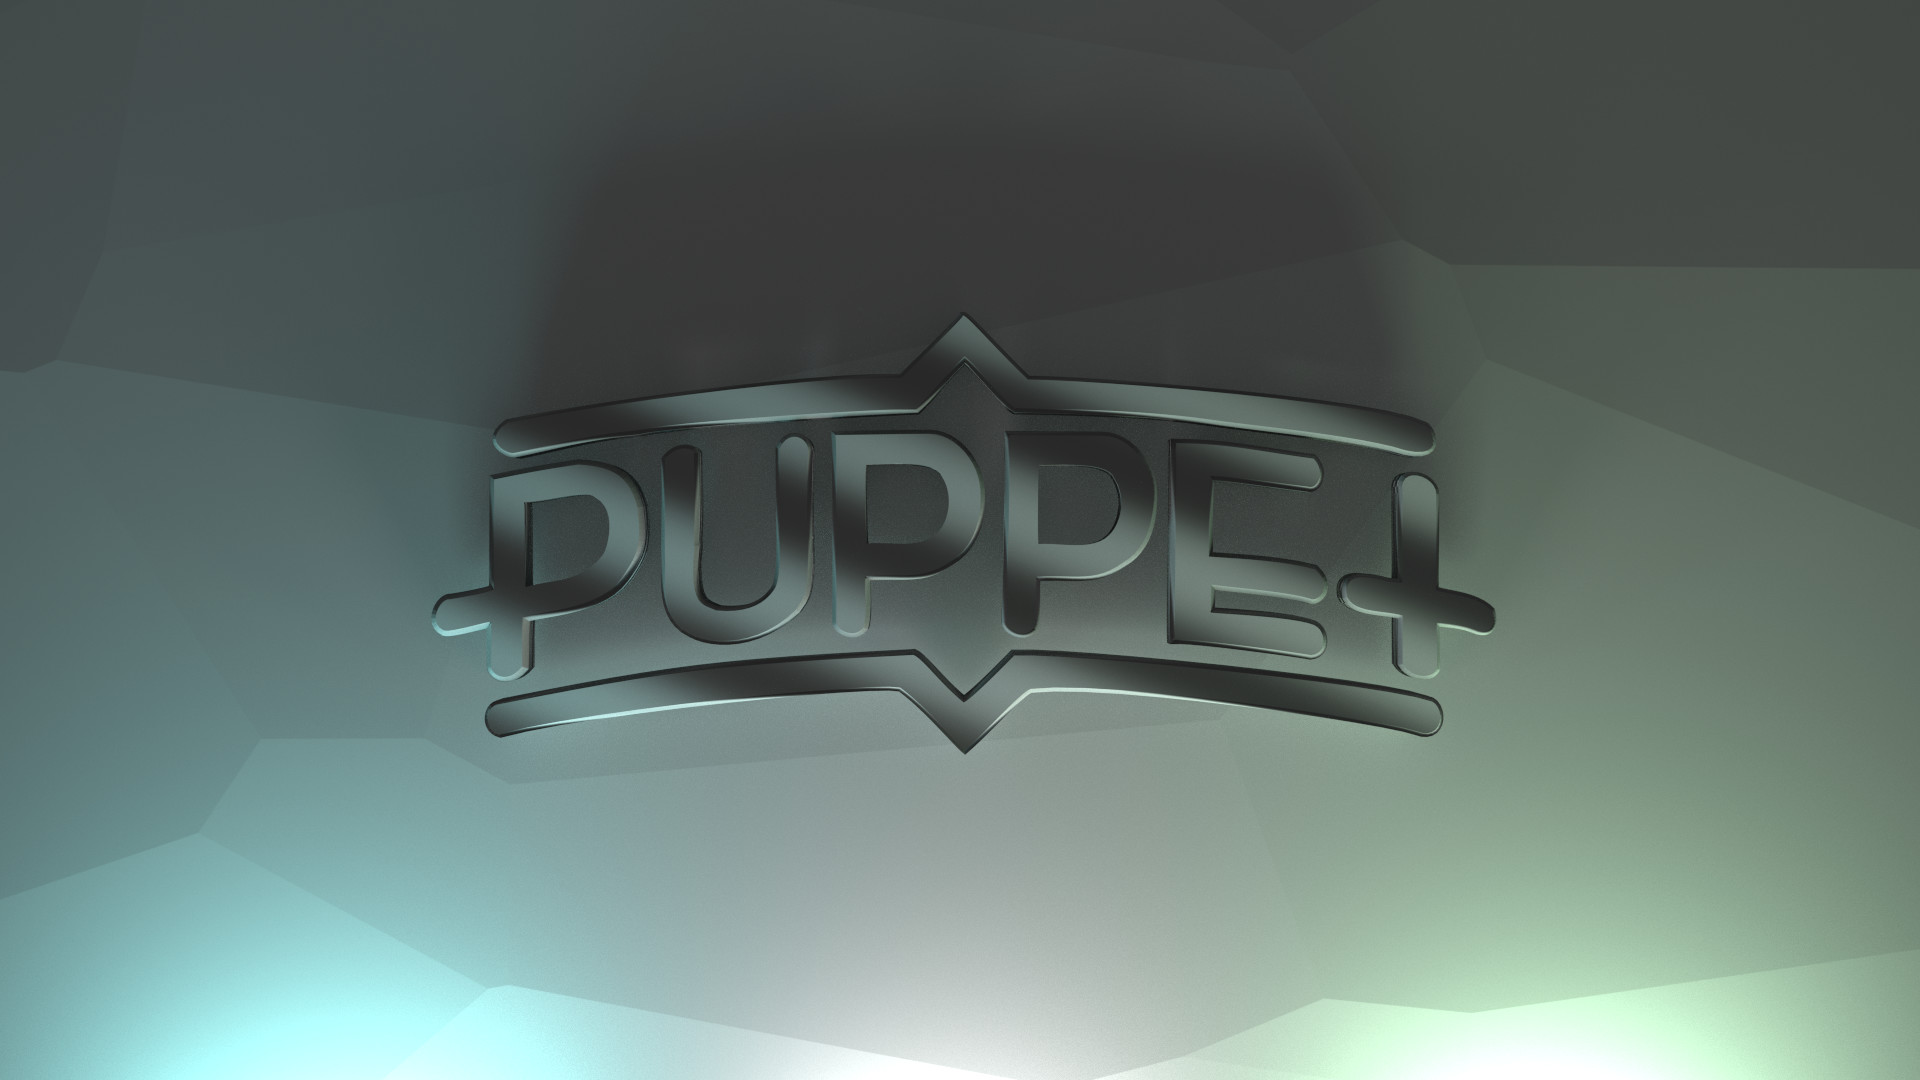 1920x1080 Puppet Wallpaper by Syliss1 Puppet Wallpaper by Syliss1